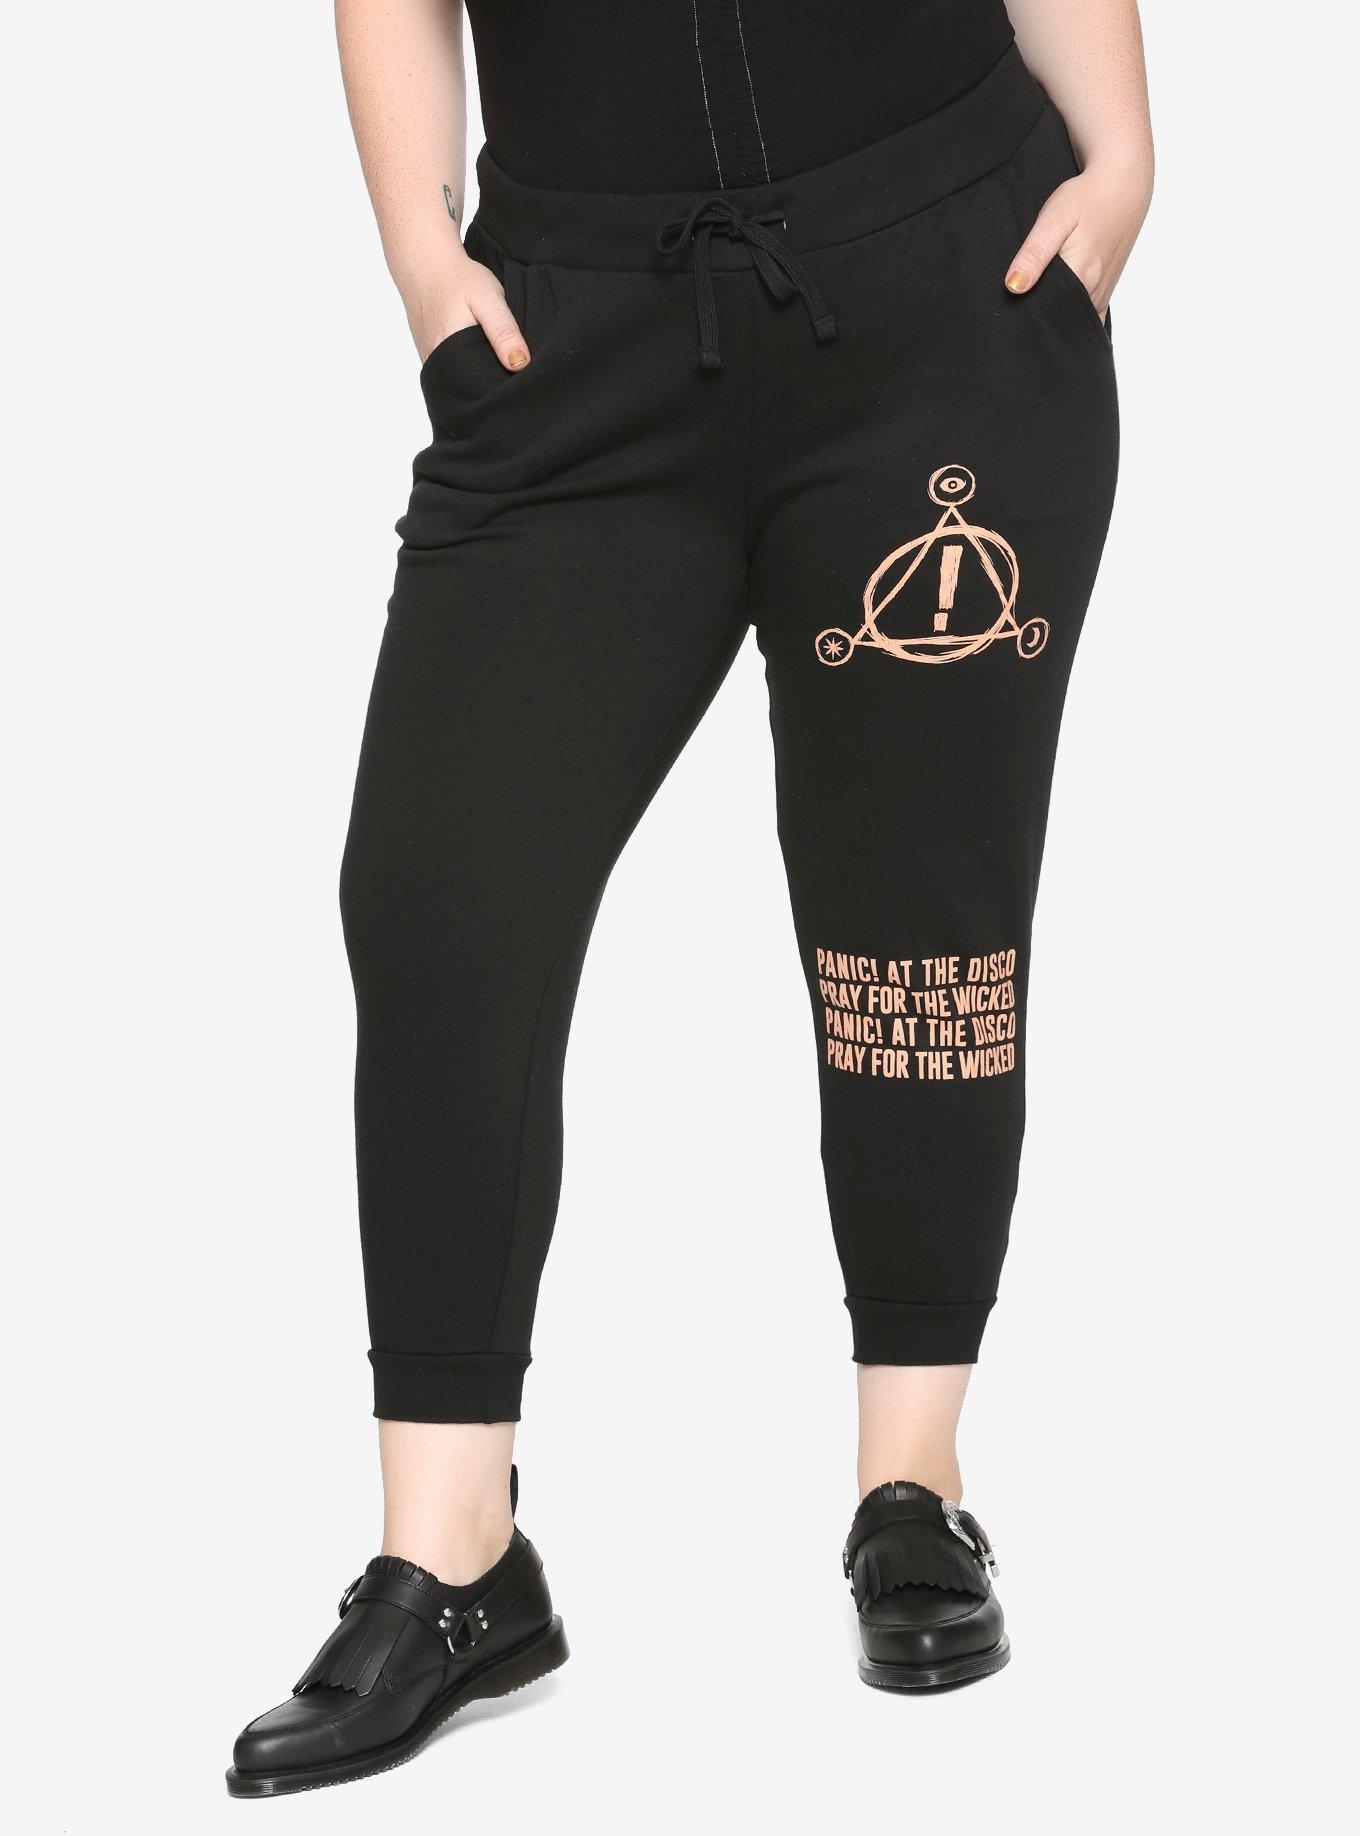 Panic! At The Disco Pray For The Wicked Girls Jogger Pants Plus Size, BLACK, hi-res